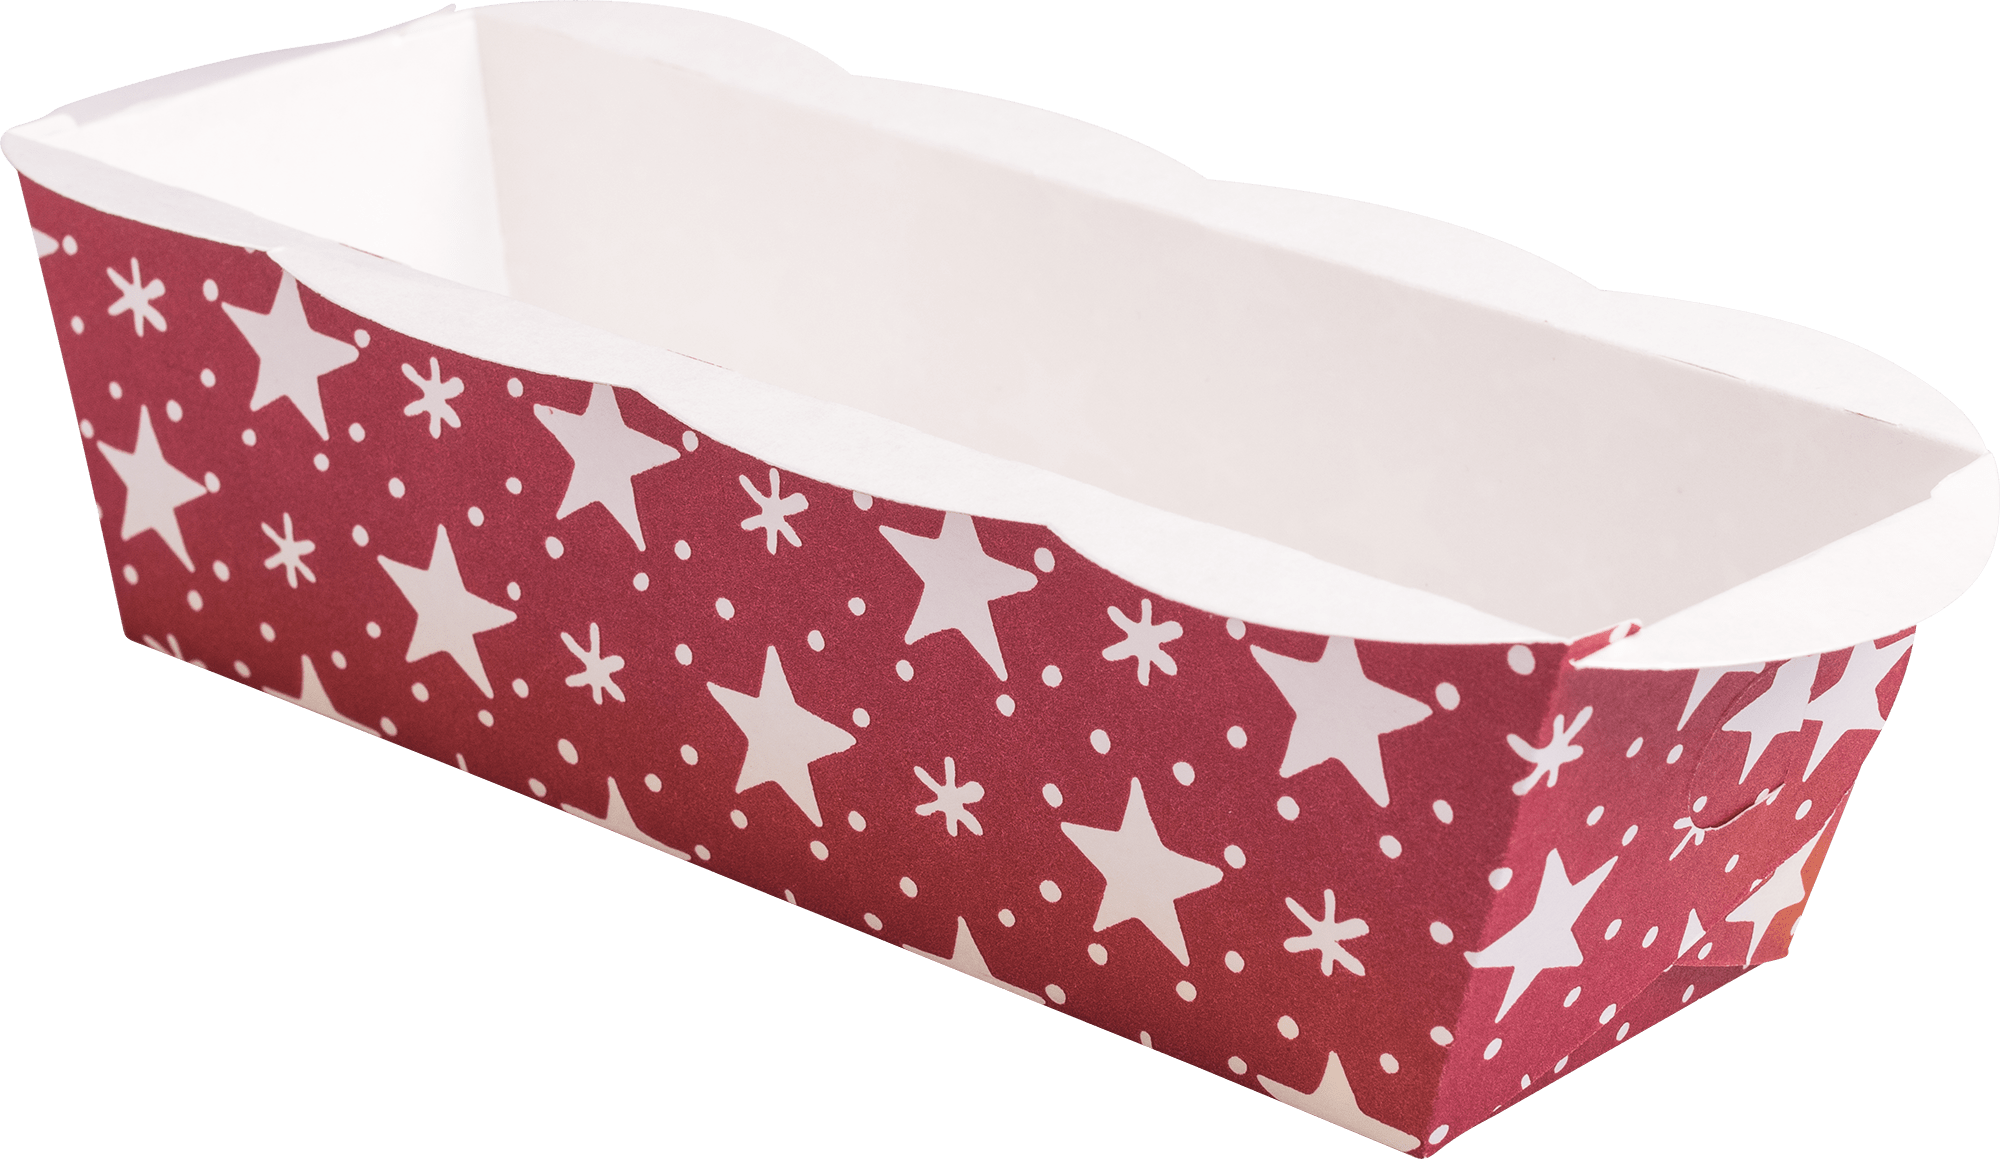 XL baking moulds star white on red, plano